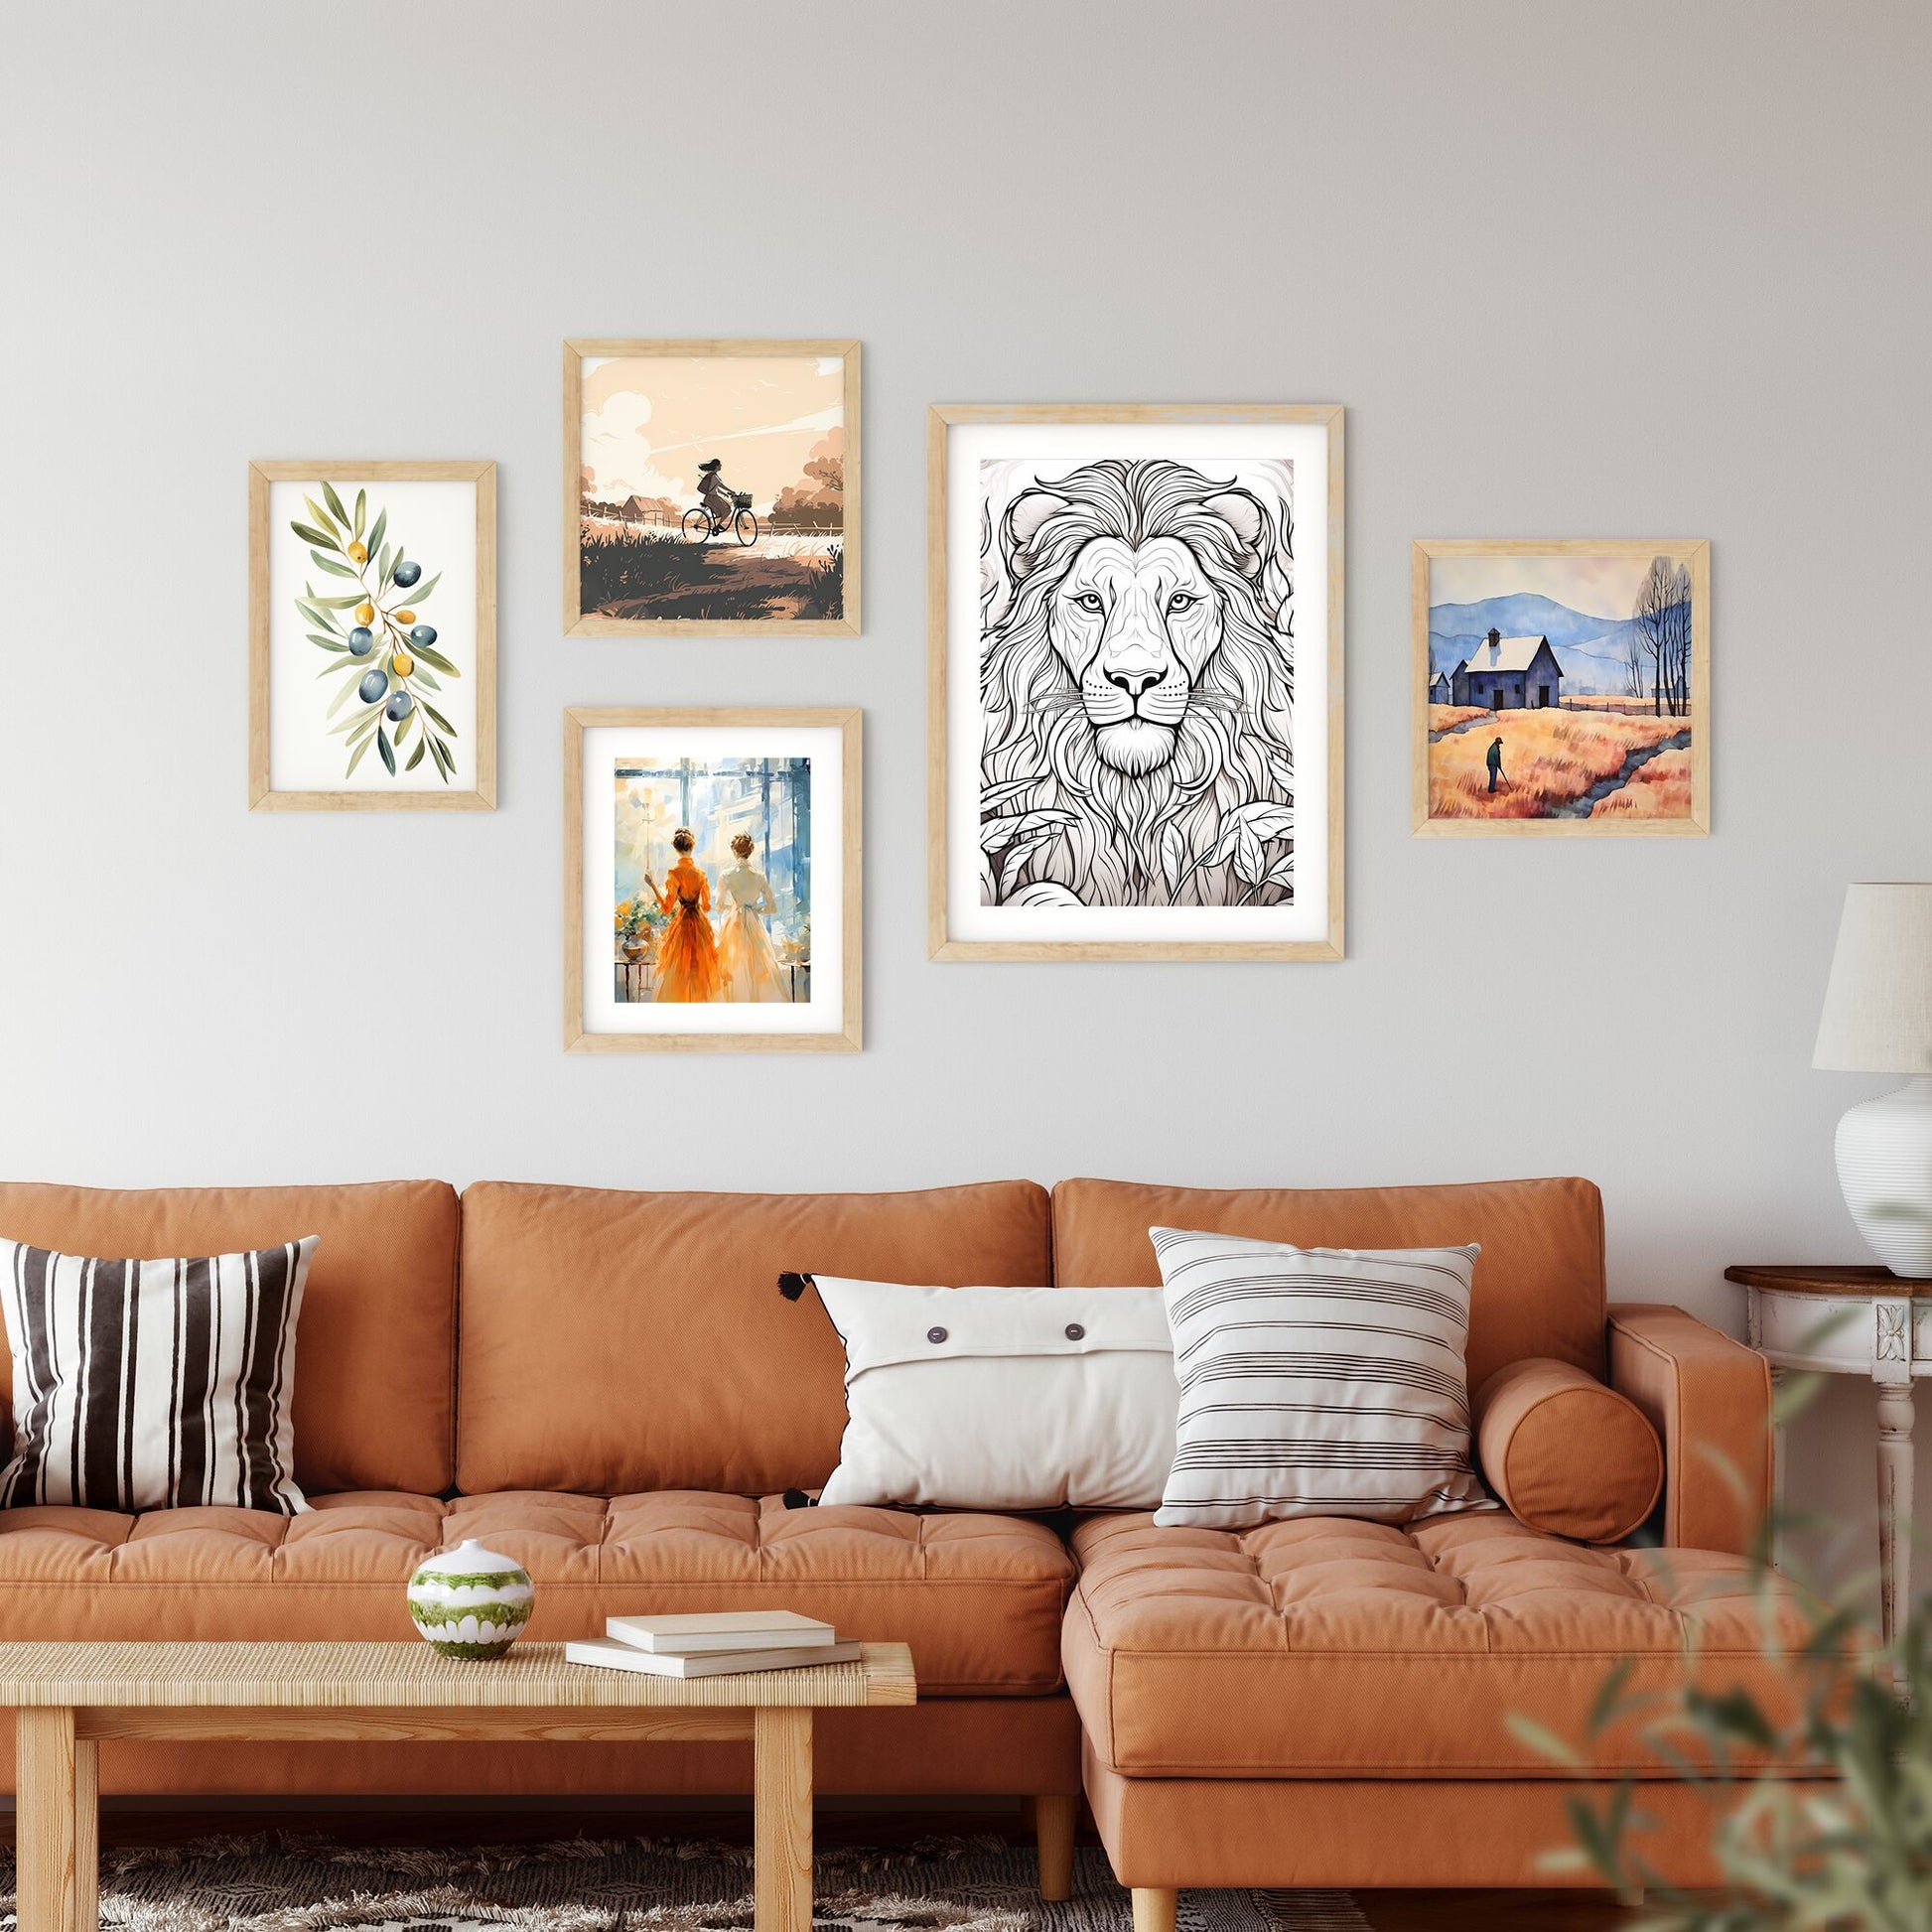 Black And White Drawing Of A Lion Art Print Default Title